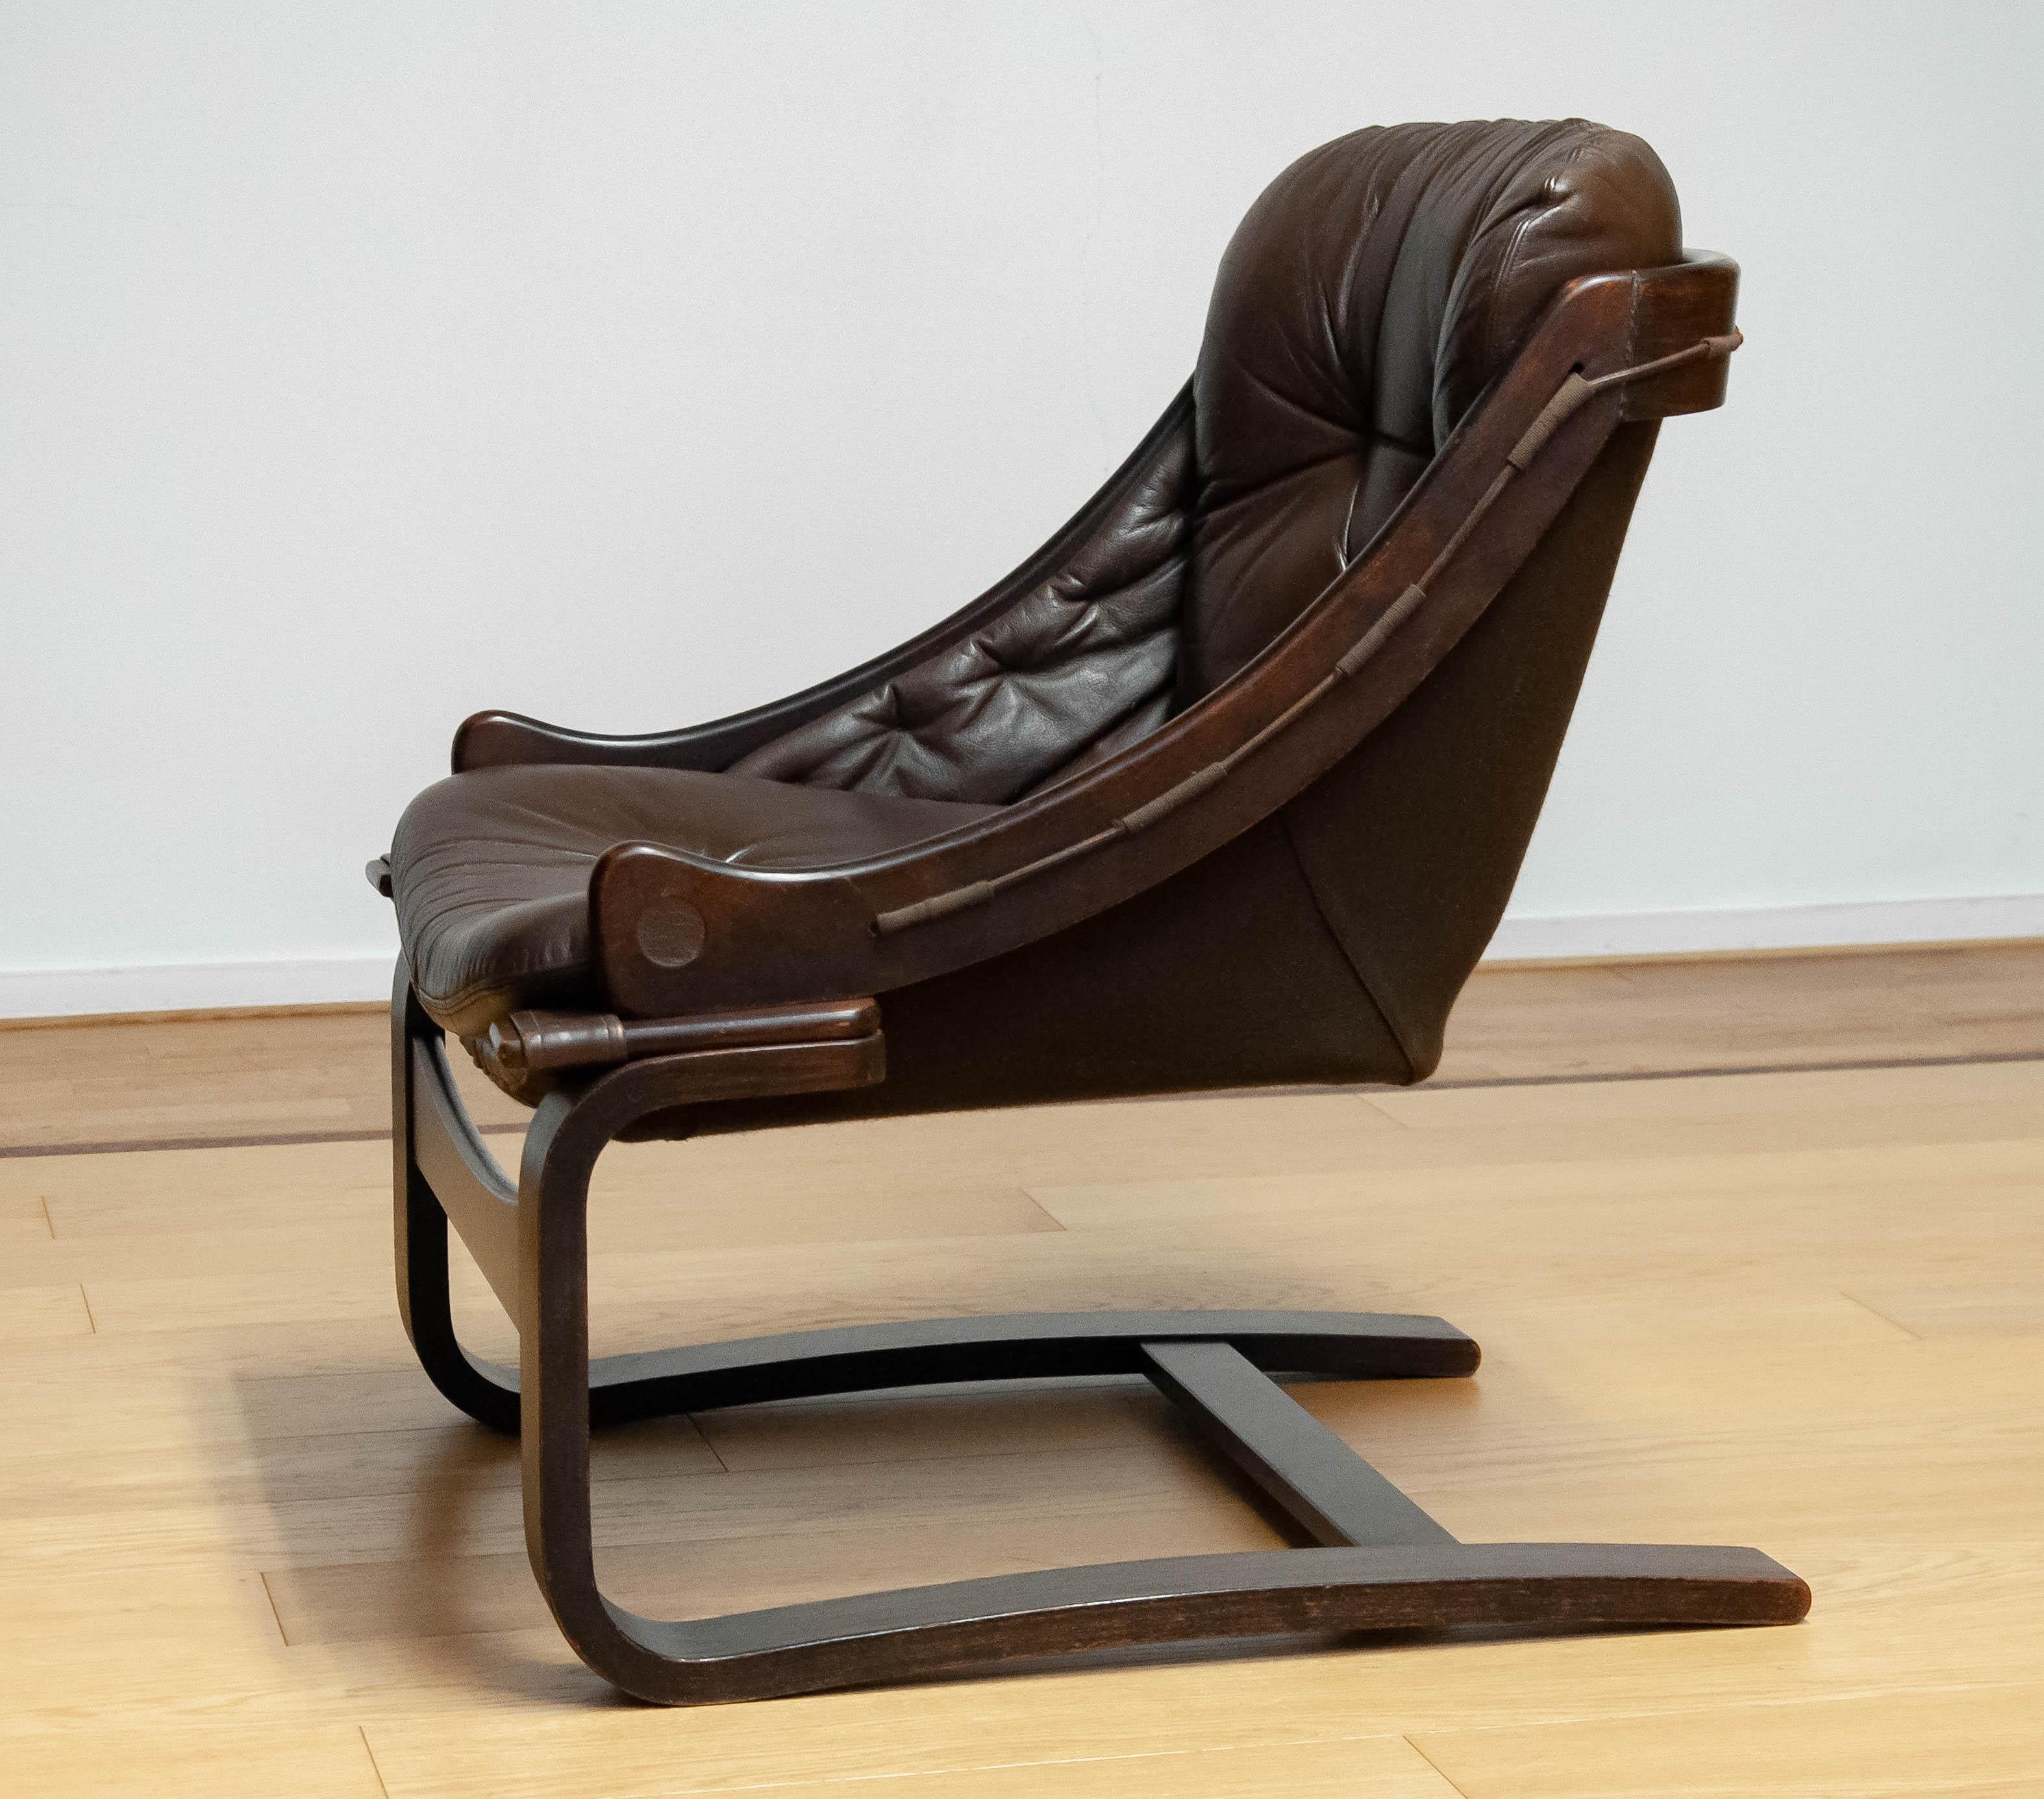 1970s Brown Leather Lounge Chair Model 'Krona' By Ake Fribytter For Nelo, Sweden For Sale 2